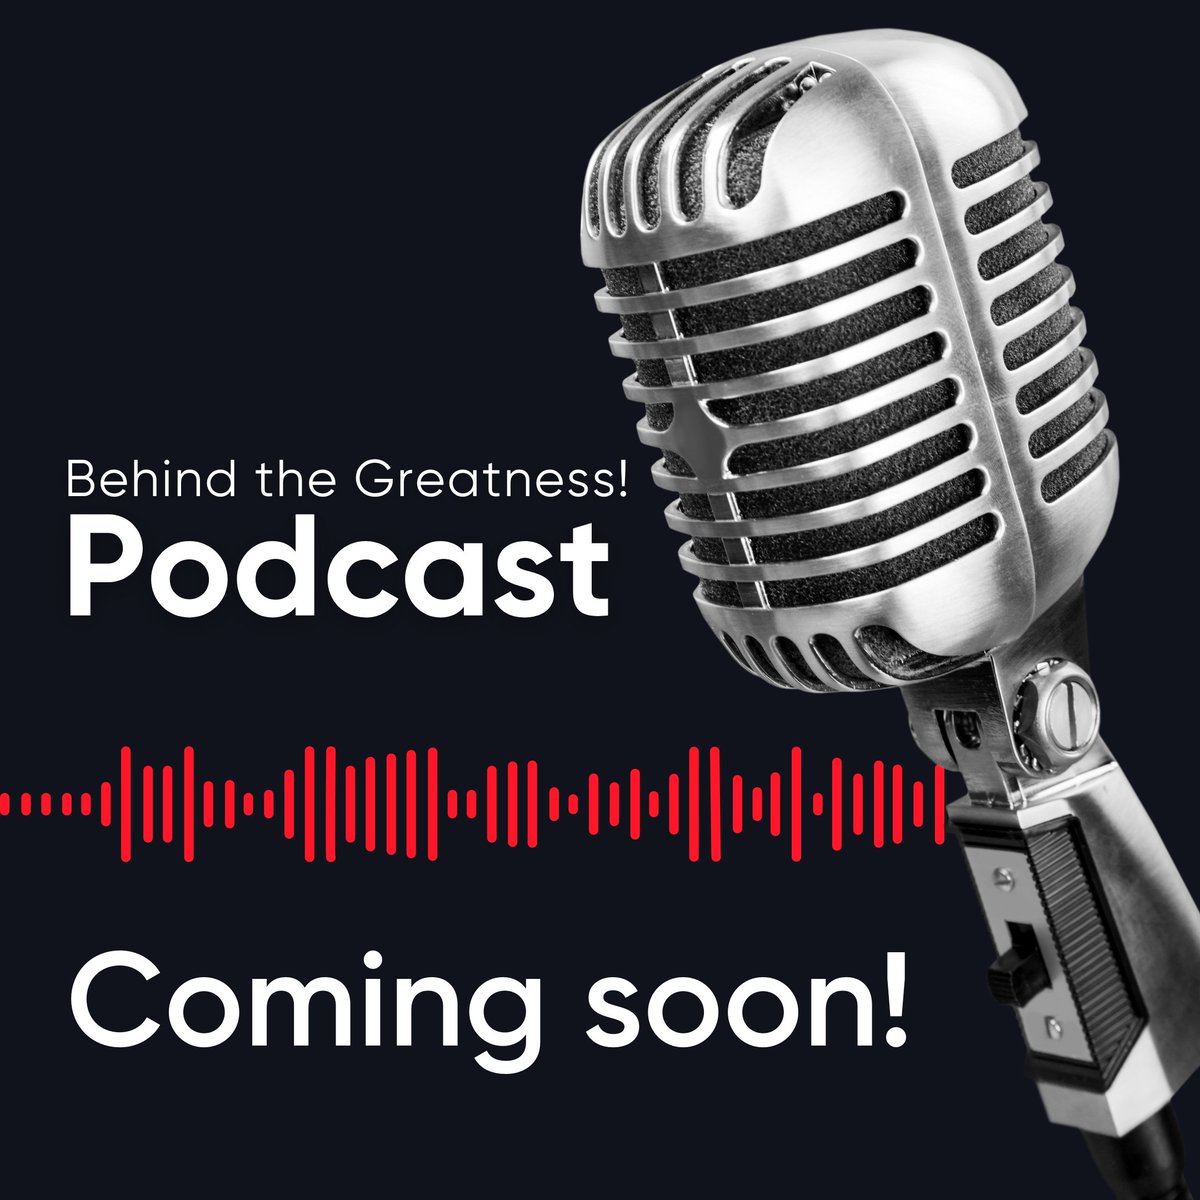 Exciting news! Get ready for the debut of our inaugural podcast in the Middle East: 'Behind the Greatness!'🎙

Stay tuned for an abundance of valuable tips and inspiration coming your way!

#podcast #businesspodcast #podcastcommunity #podcastlife #gptwme #gptw #workculture